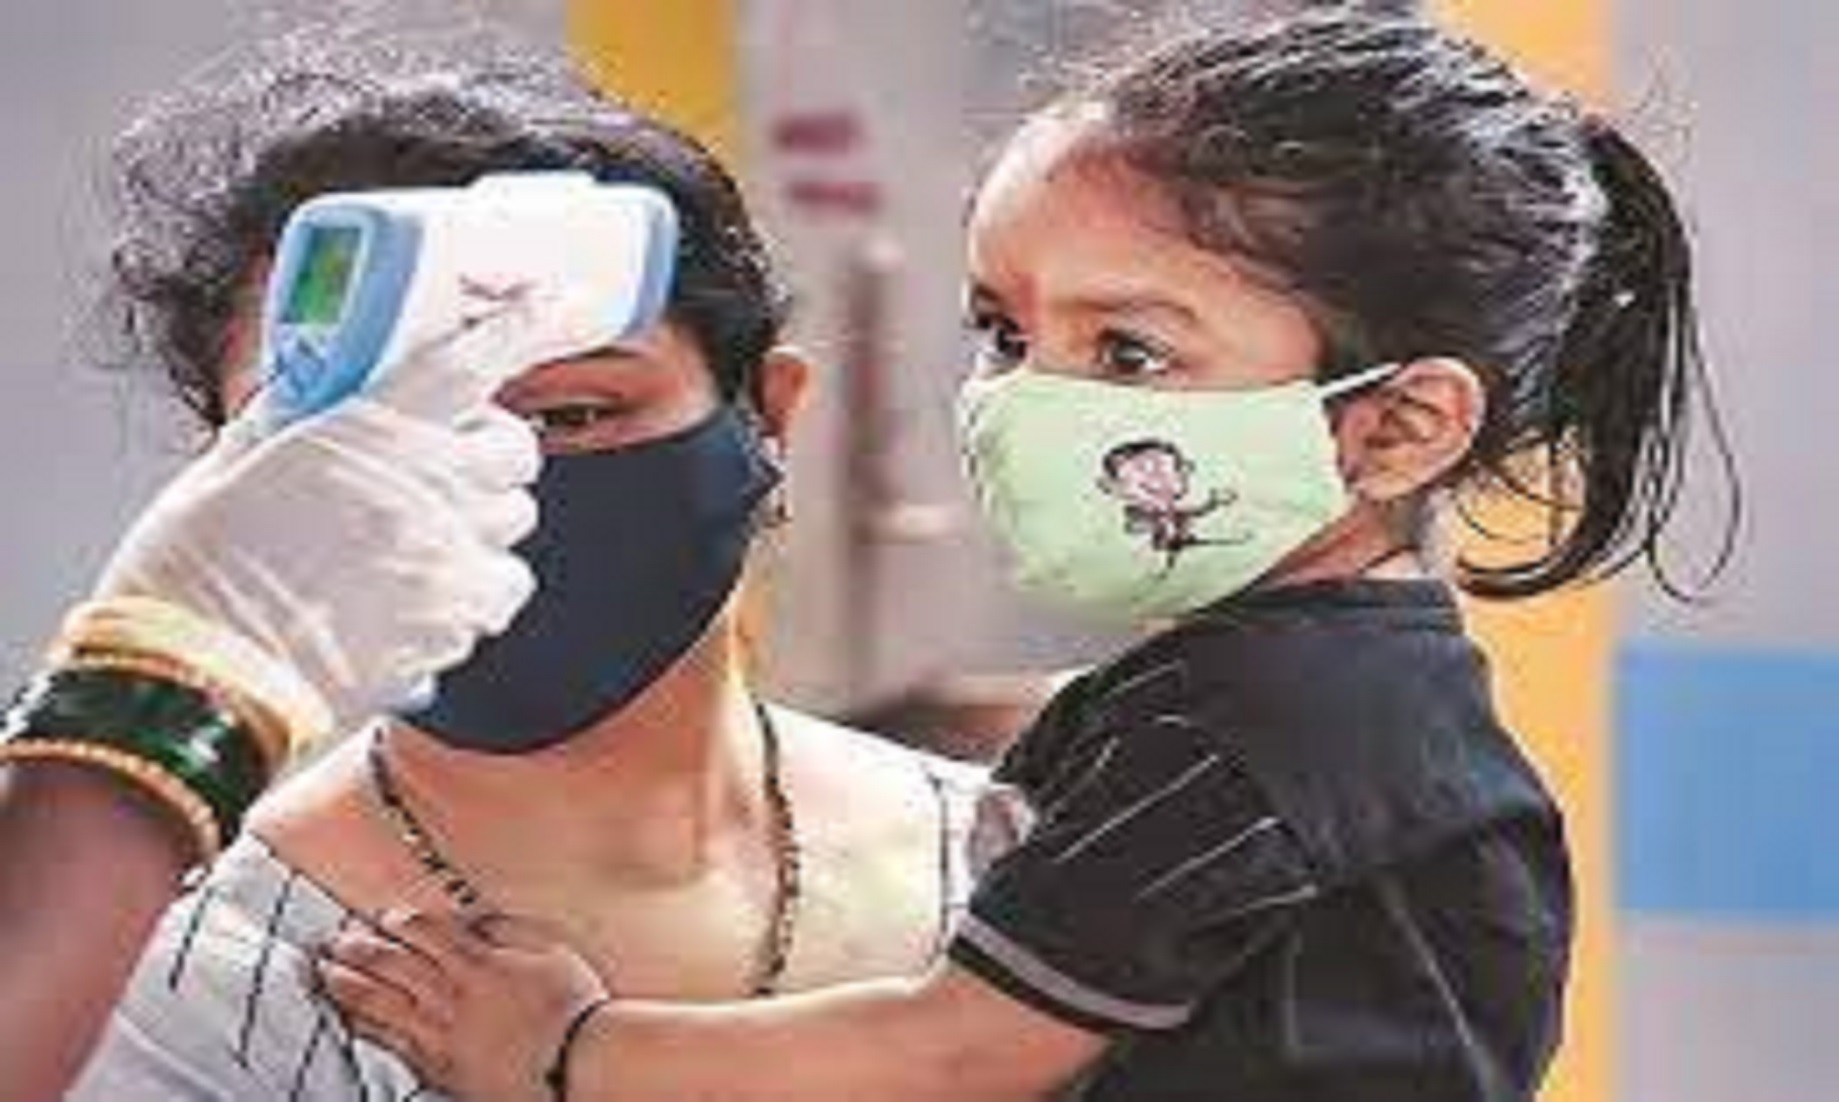 India Reported 16,103 New COVID-19 Cases